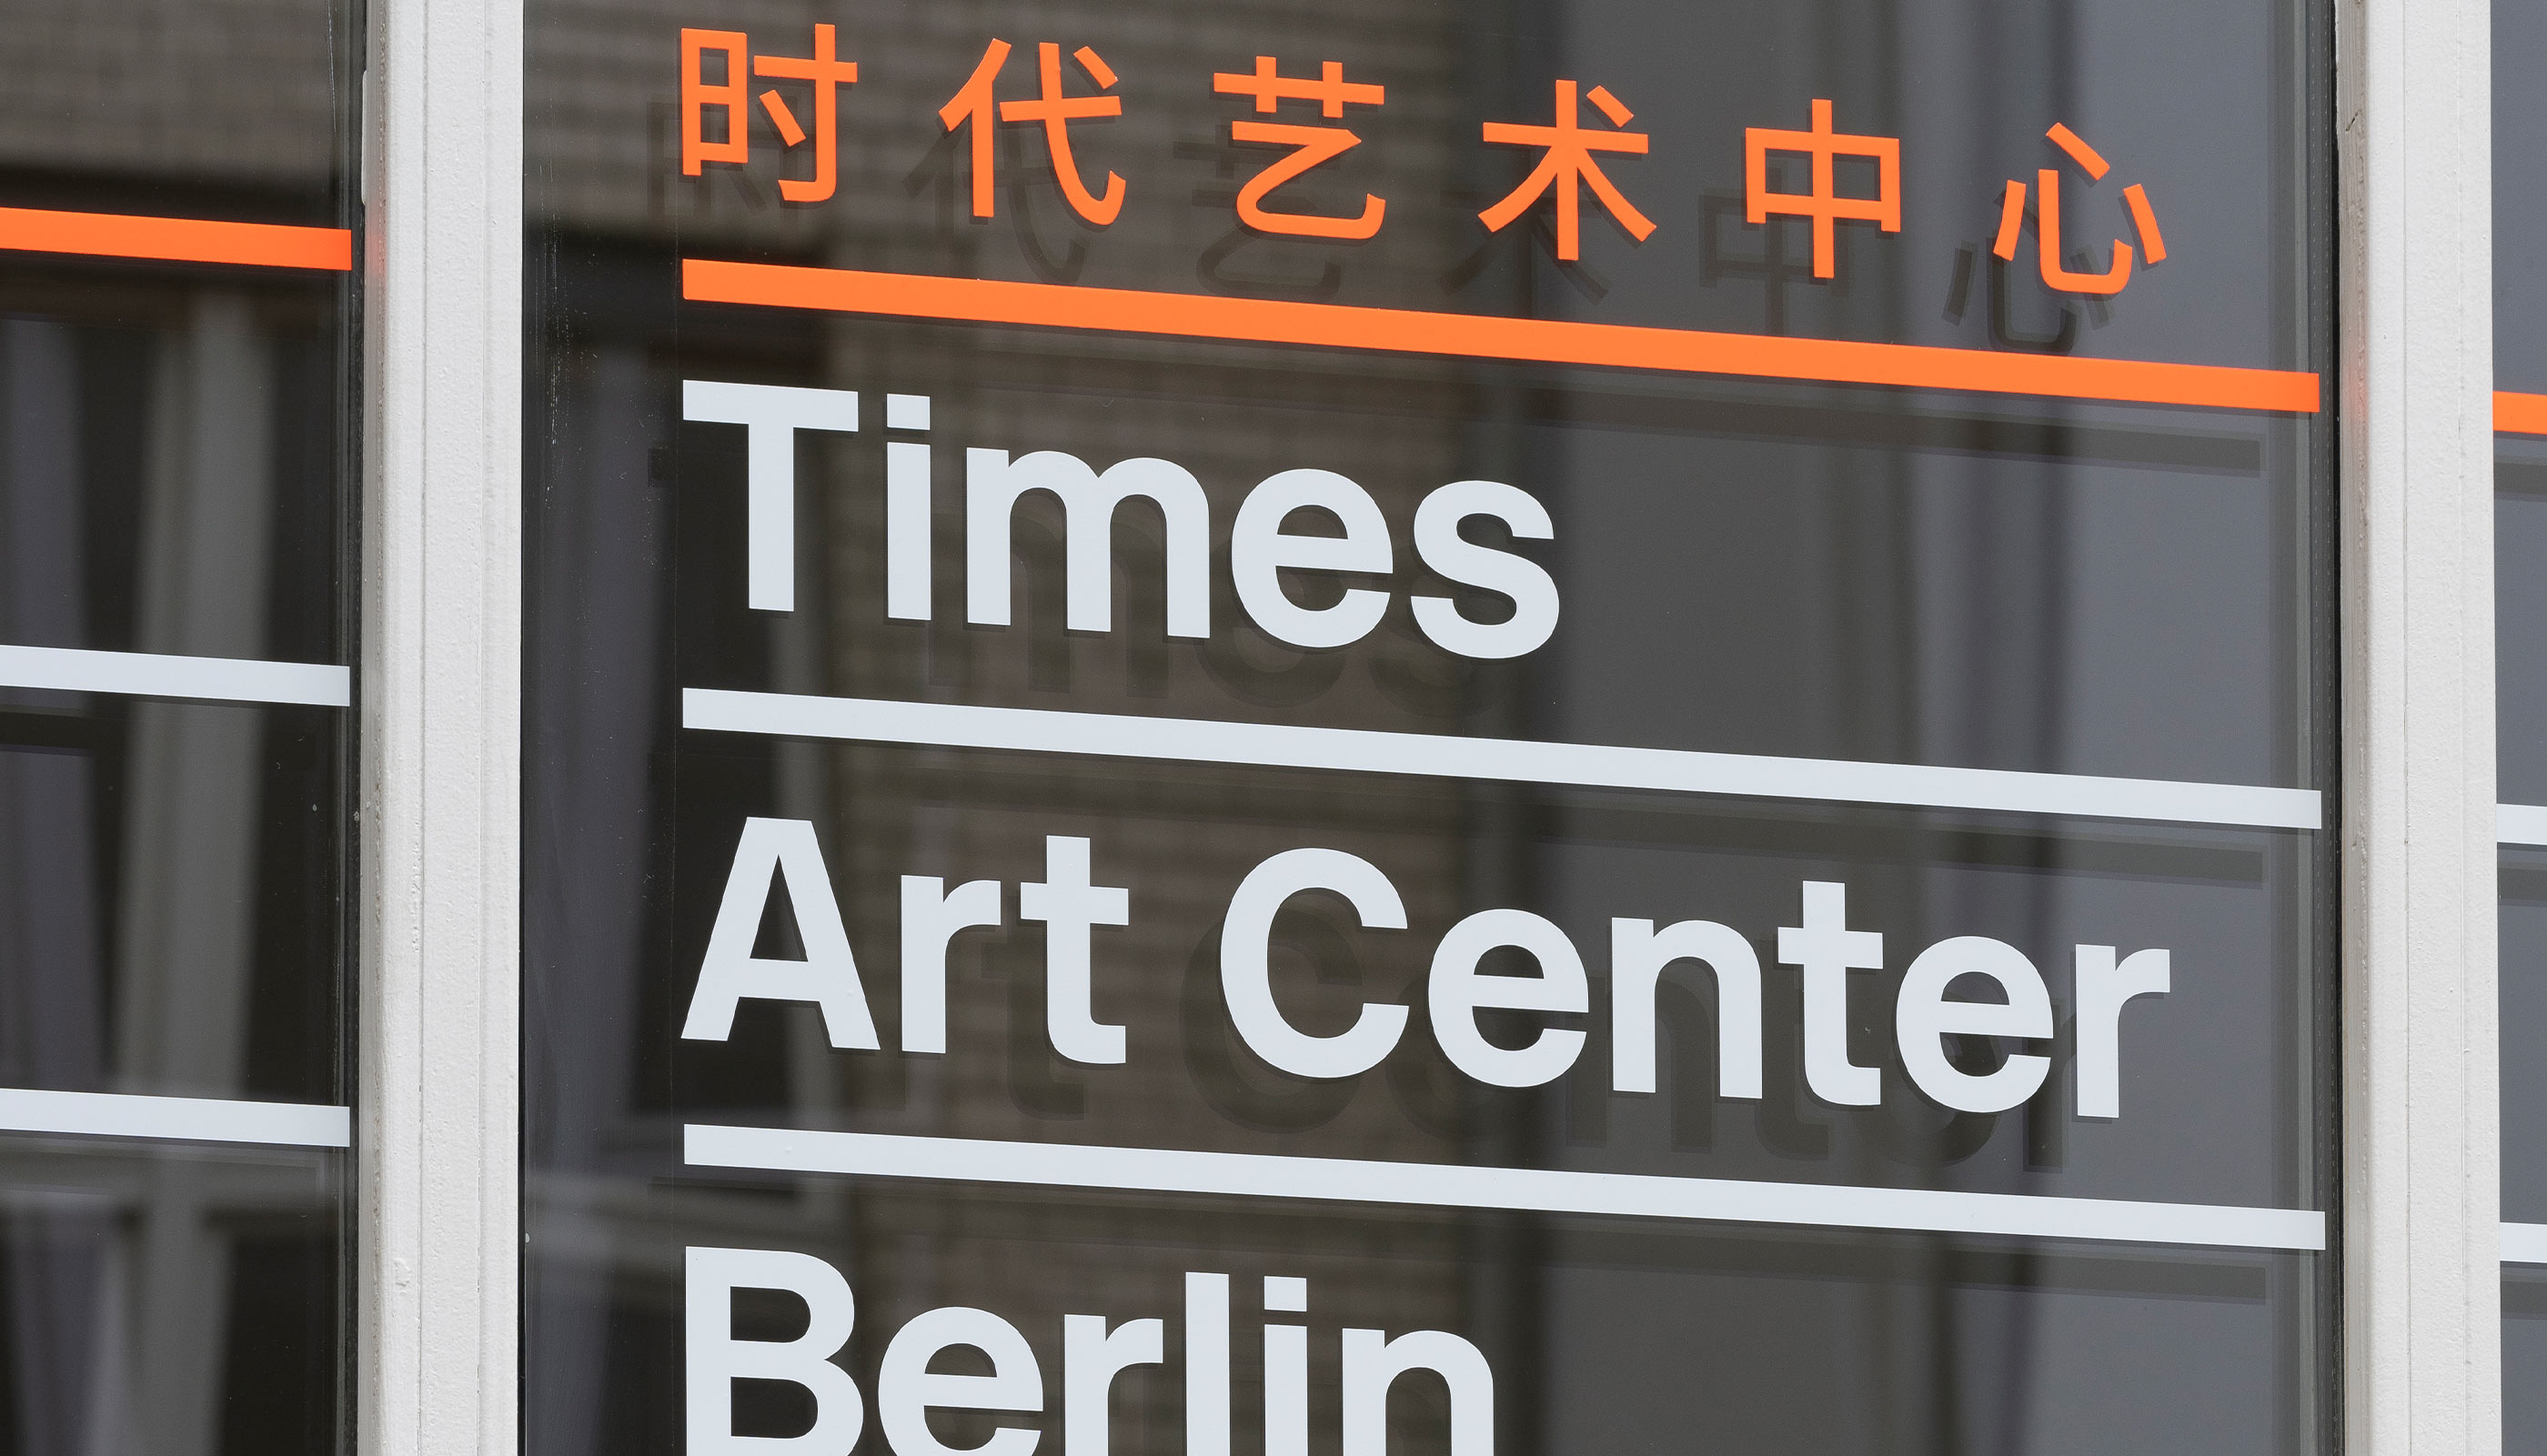 Times Art Center Berlin, Guangdong Times Museum China, exhibition design